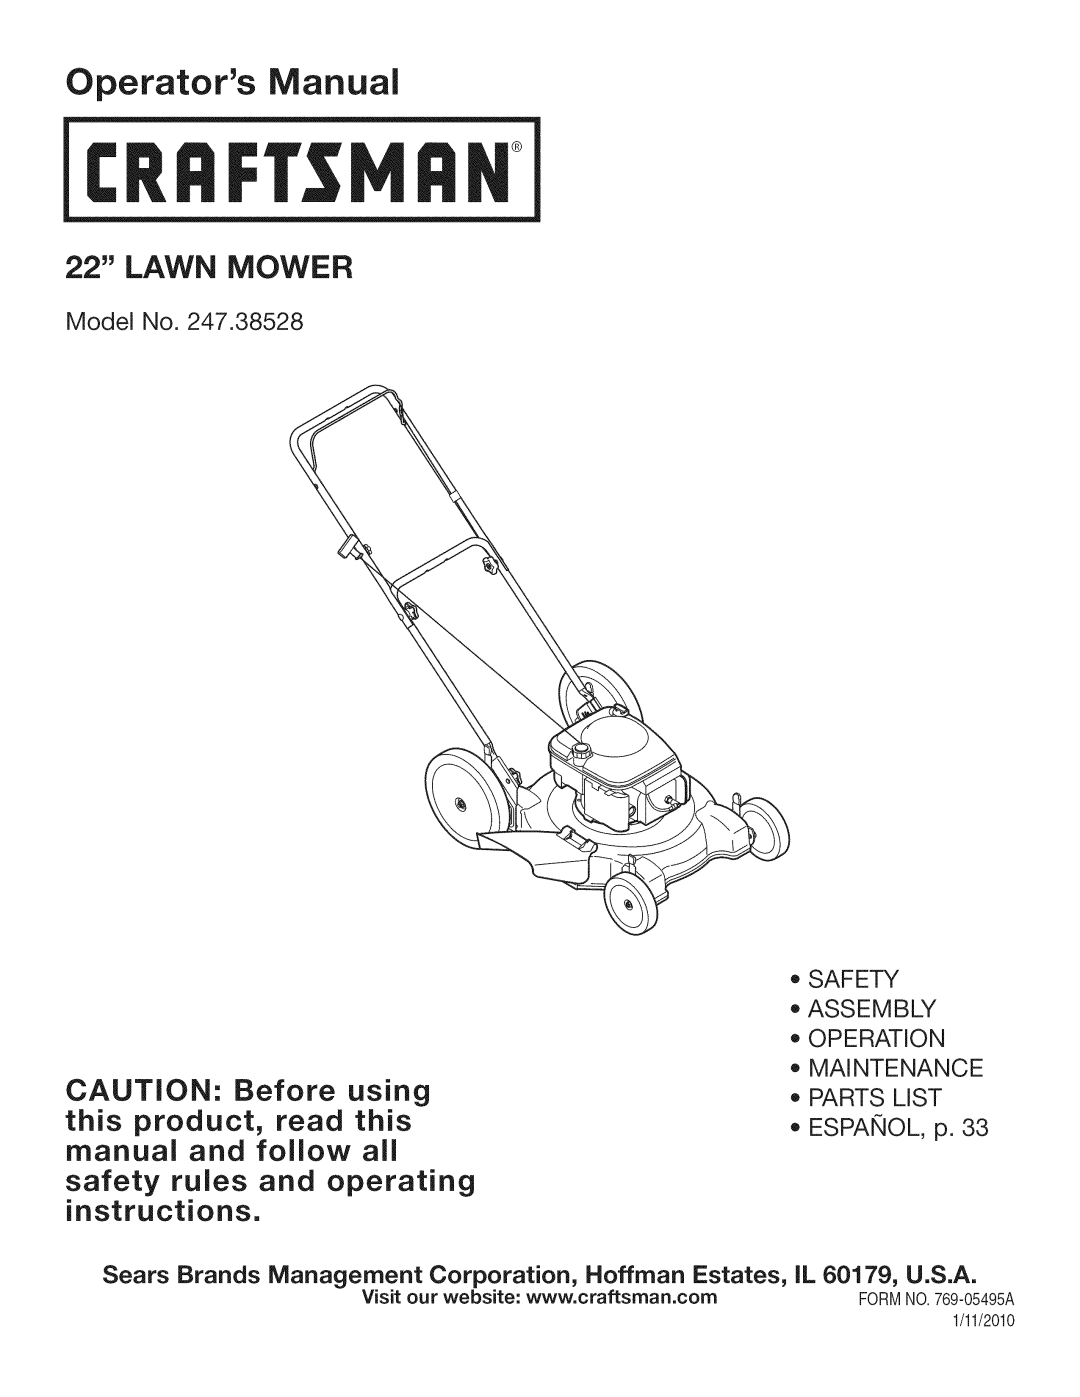 Craftsman 247.38528 manual Lawn Mower, safety rules and operating, Crrftsmrh, Operators Manual, instructions 